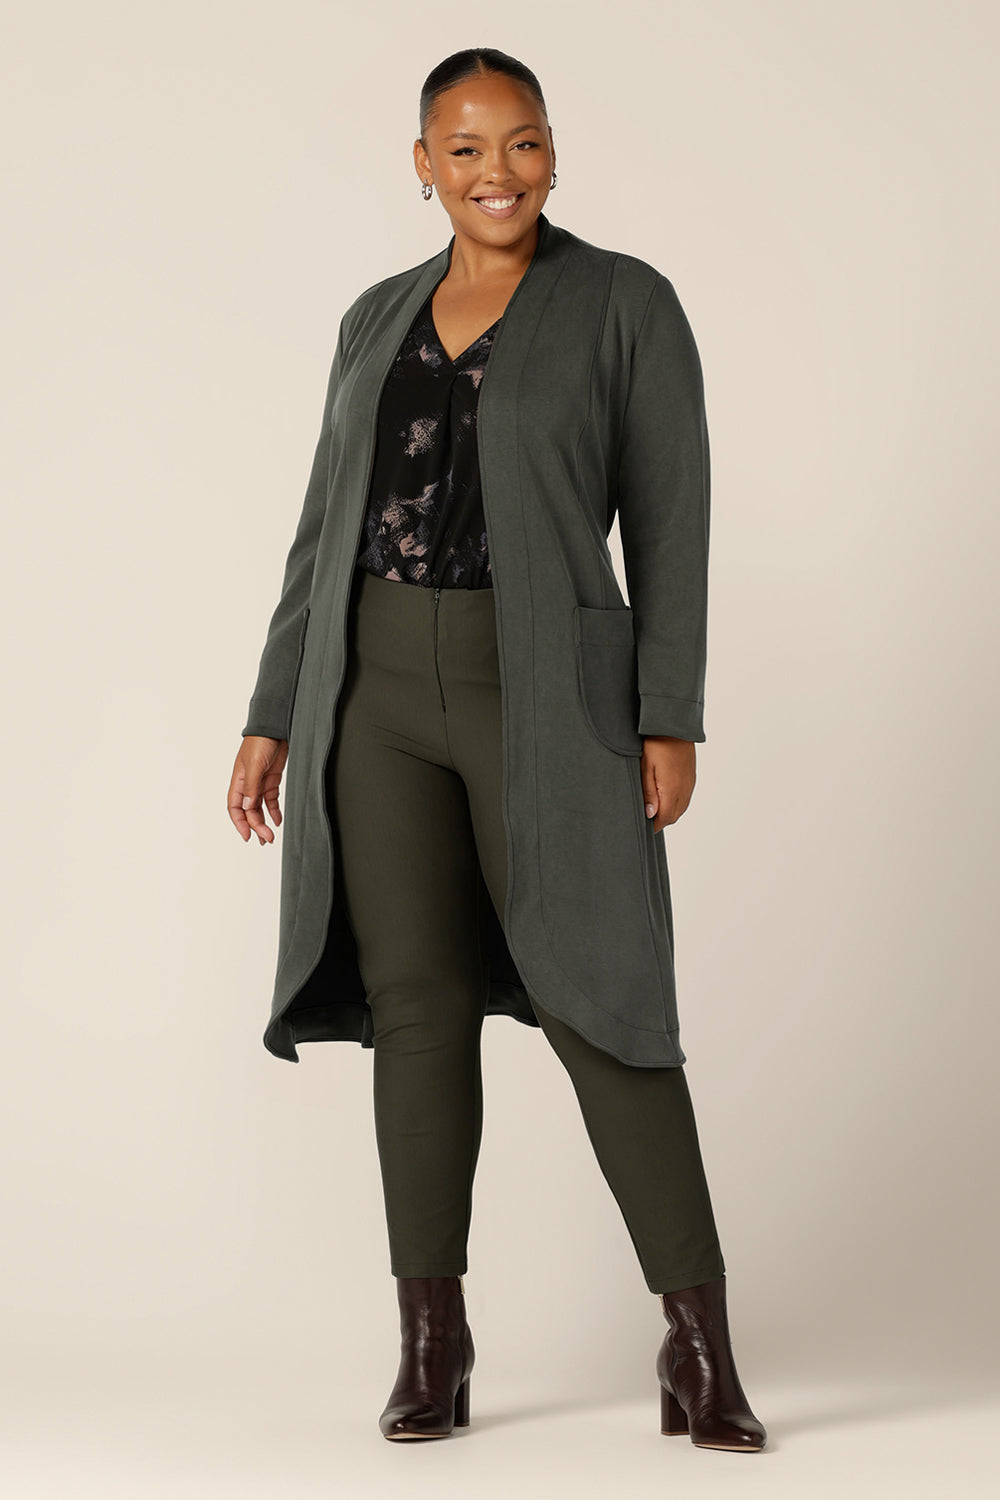 A classic winter coat for women, the Marant Trenchcoat in Sage green by Australian and New Zealand women's clothing label L&F is shown in a size 18, and worn with a printed, black jersey top and olive green, slim leg pants. A collarless, open fronted coat with tie belt and patch pockets, this women's winter jacket is available to buy in an inclusive 8 to 24 size range.